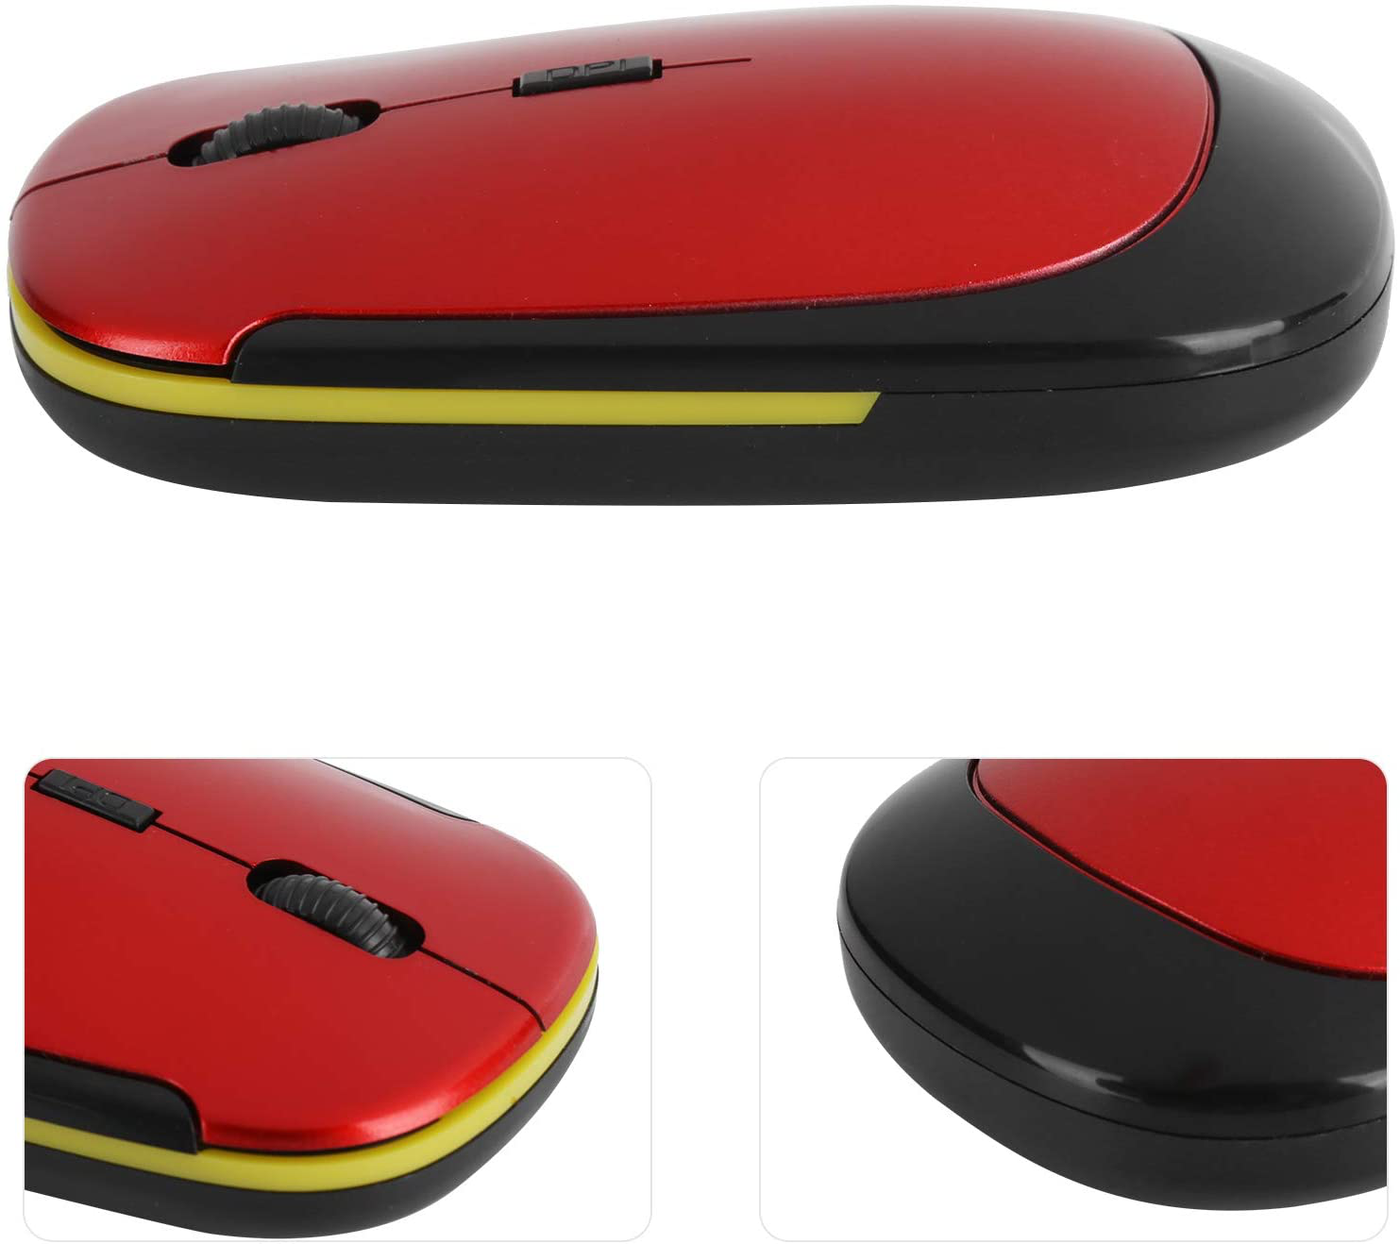 Wireless Mouse 2.4G Wreless Frequency Hopping Adjustable Optical USB Receiver Notebook Computer Accessories 1600dpi Silent Micro Motion Design Lightweight and Portable(Red)